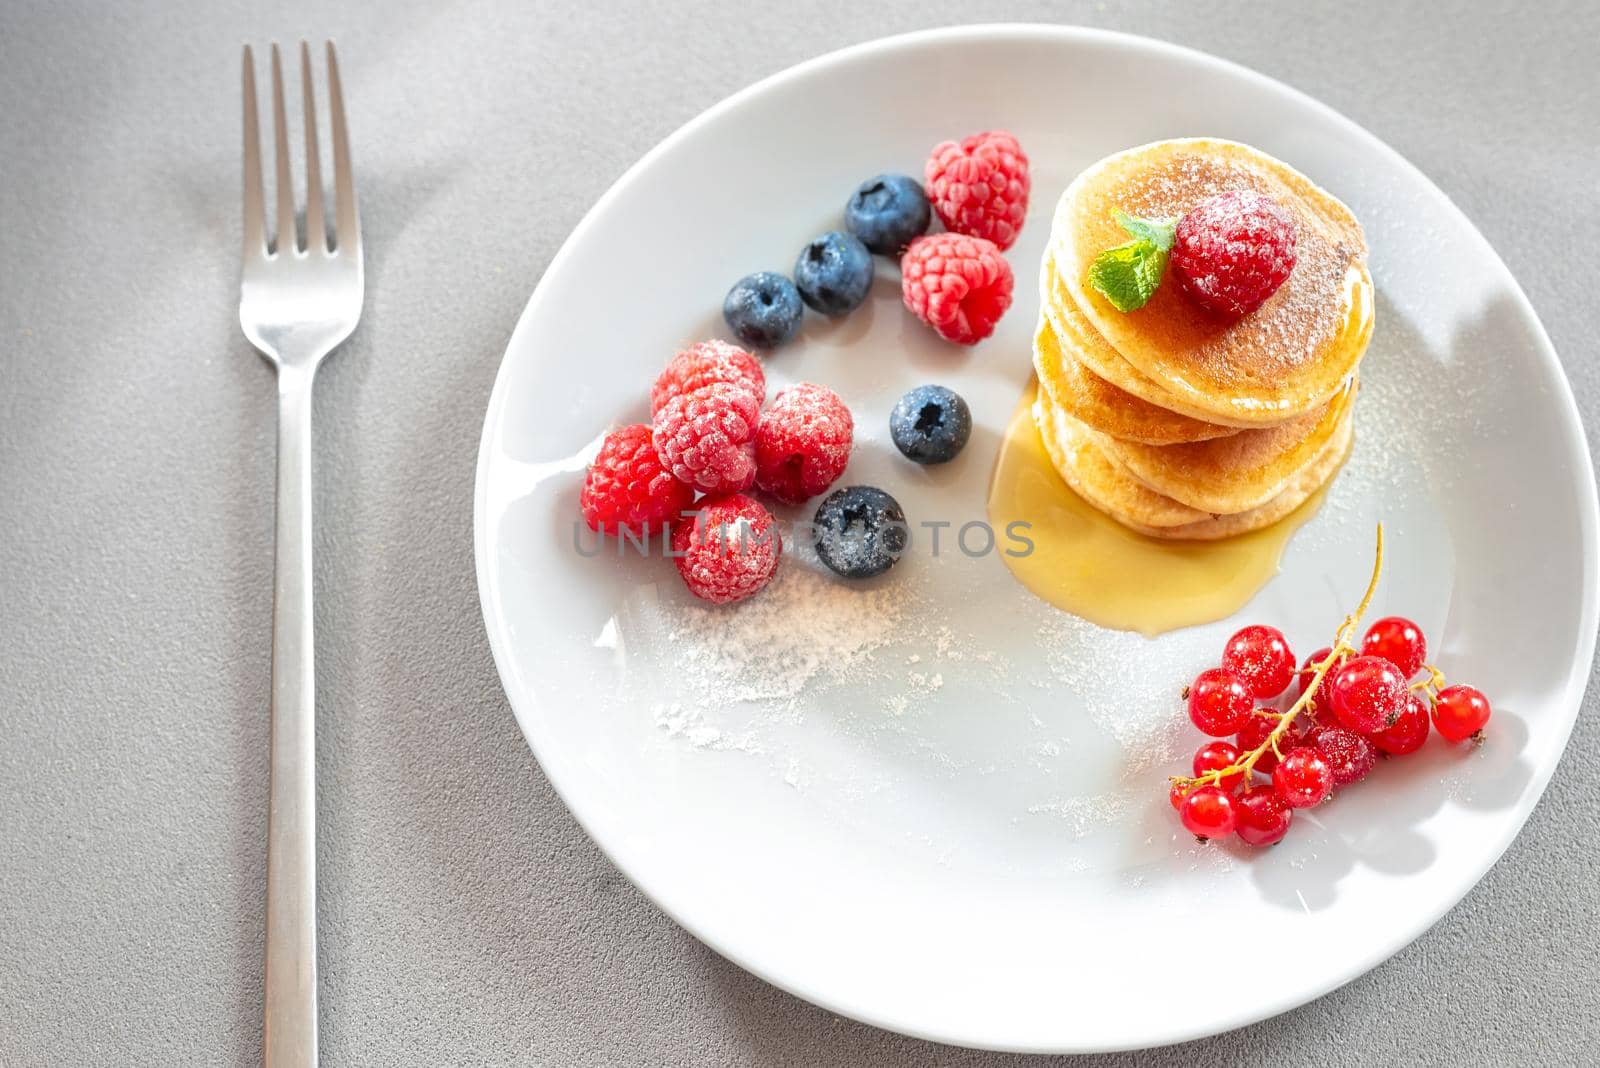 Food for breakfast healthy eating. Pancakes without butter with berries. Food for vegetarians and for dieting. American Pancakes Mini. Mini pancakes with blueberries and raspberries. American breakfast on a dark background. Healthy eating for the whole family. Homemade pancakes with berries. Top view